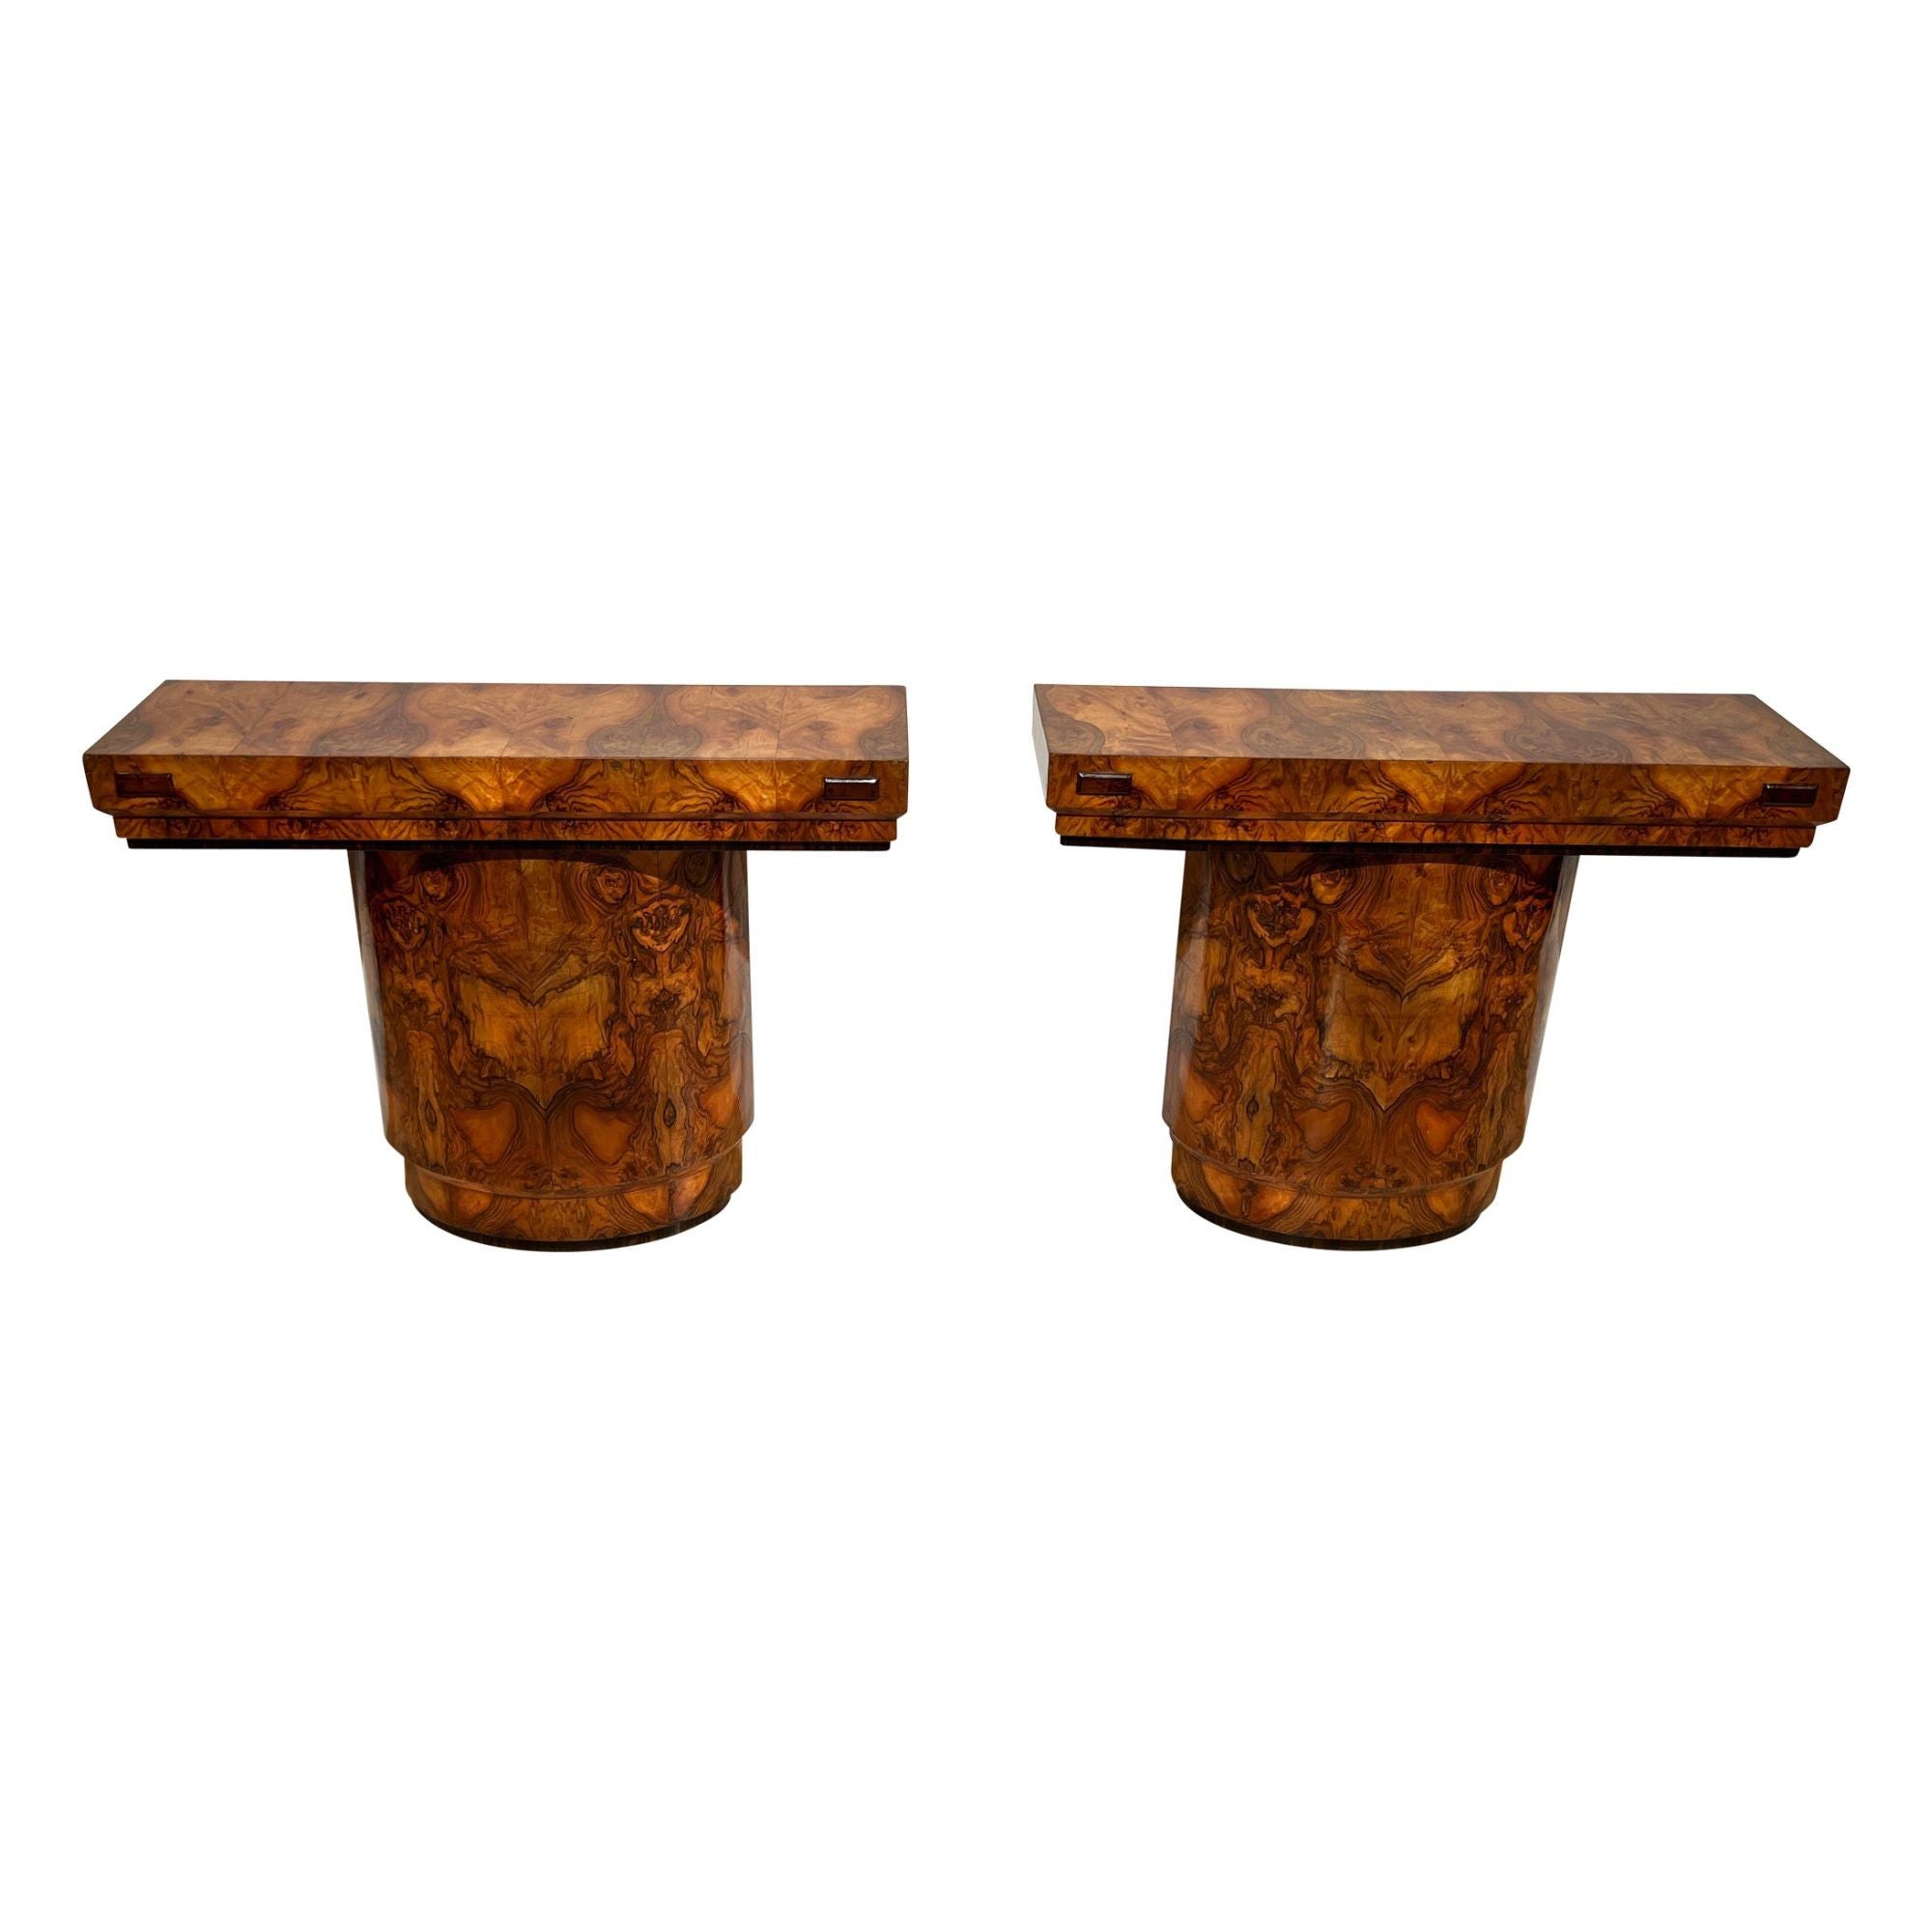 Pair of Art Deco Console Tables, Walnut Veneer and Macassar, France circa 1930 For Sale